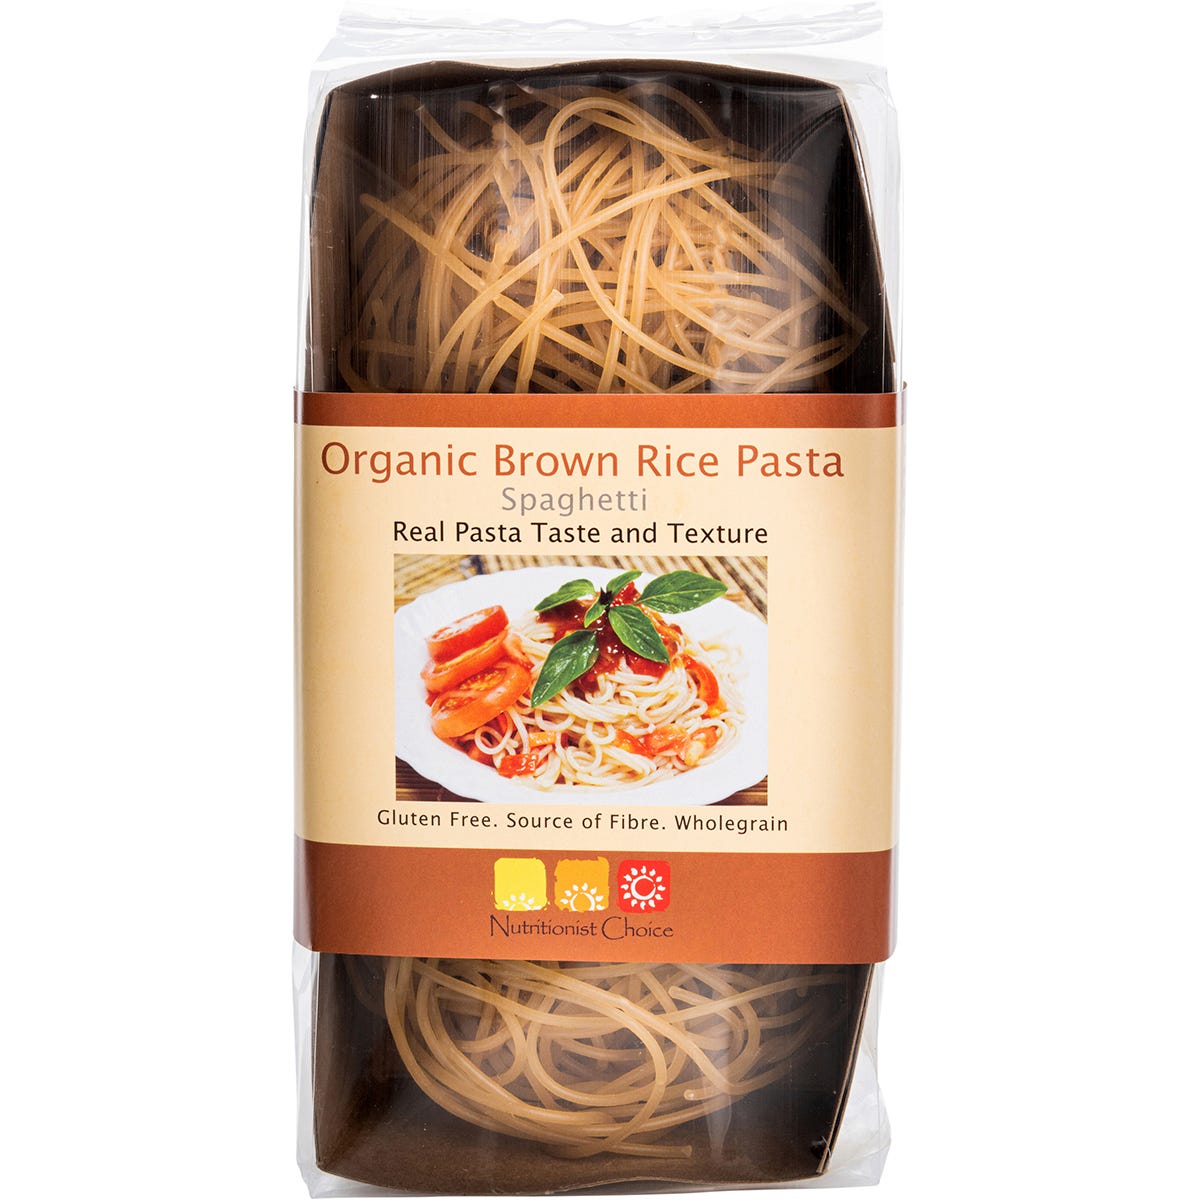 Nutritionist Choice Brown Rice Pasta Spaghetti 180g - Dr Earth - Rice Pasta & Noodles